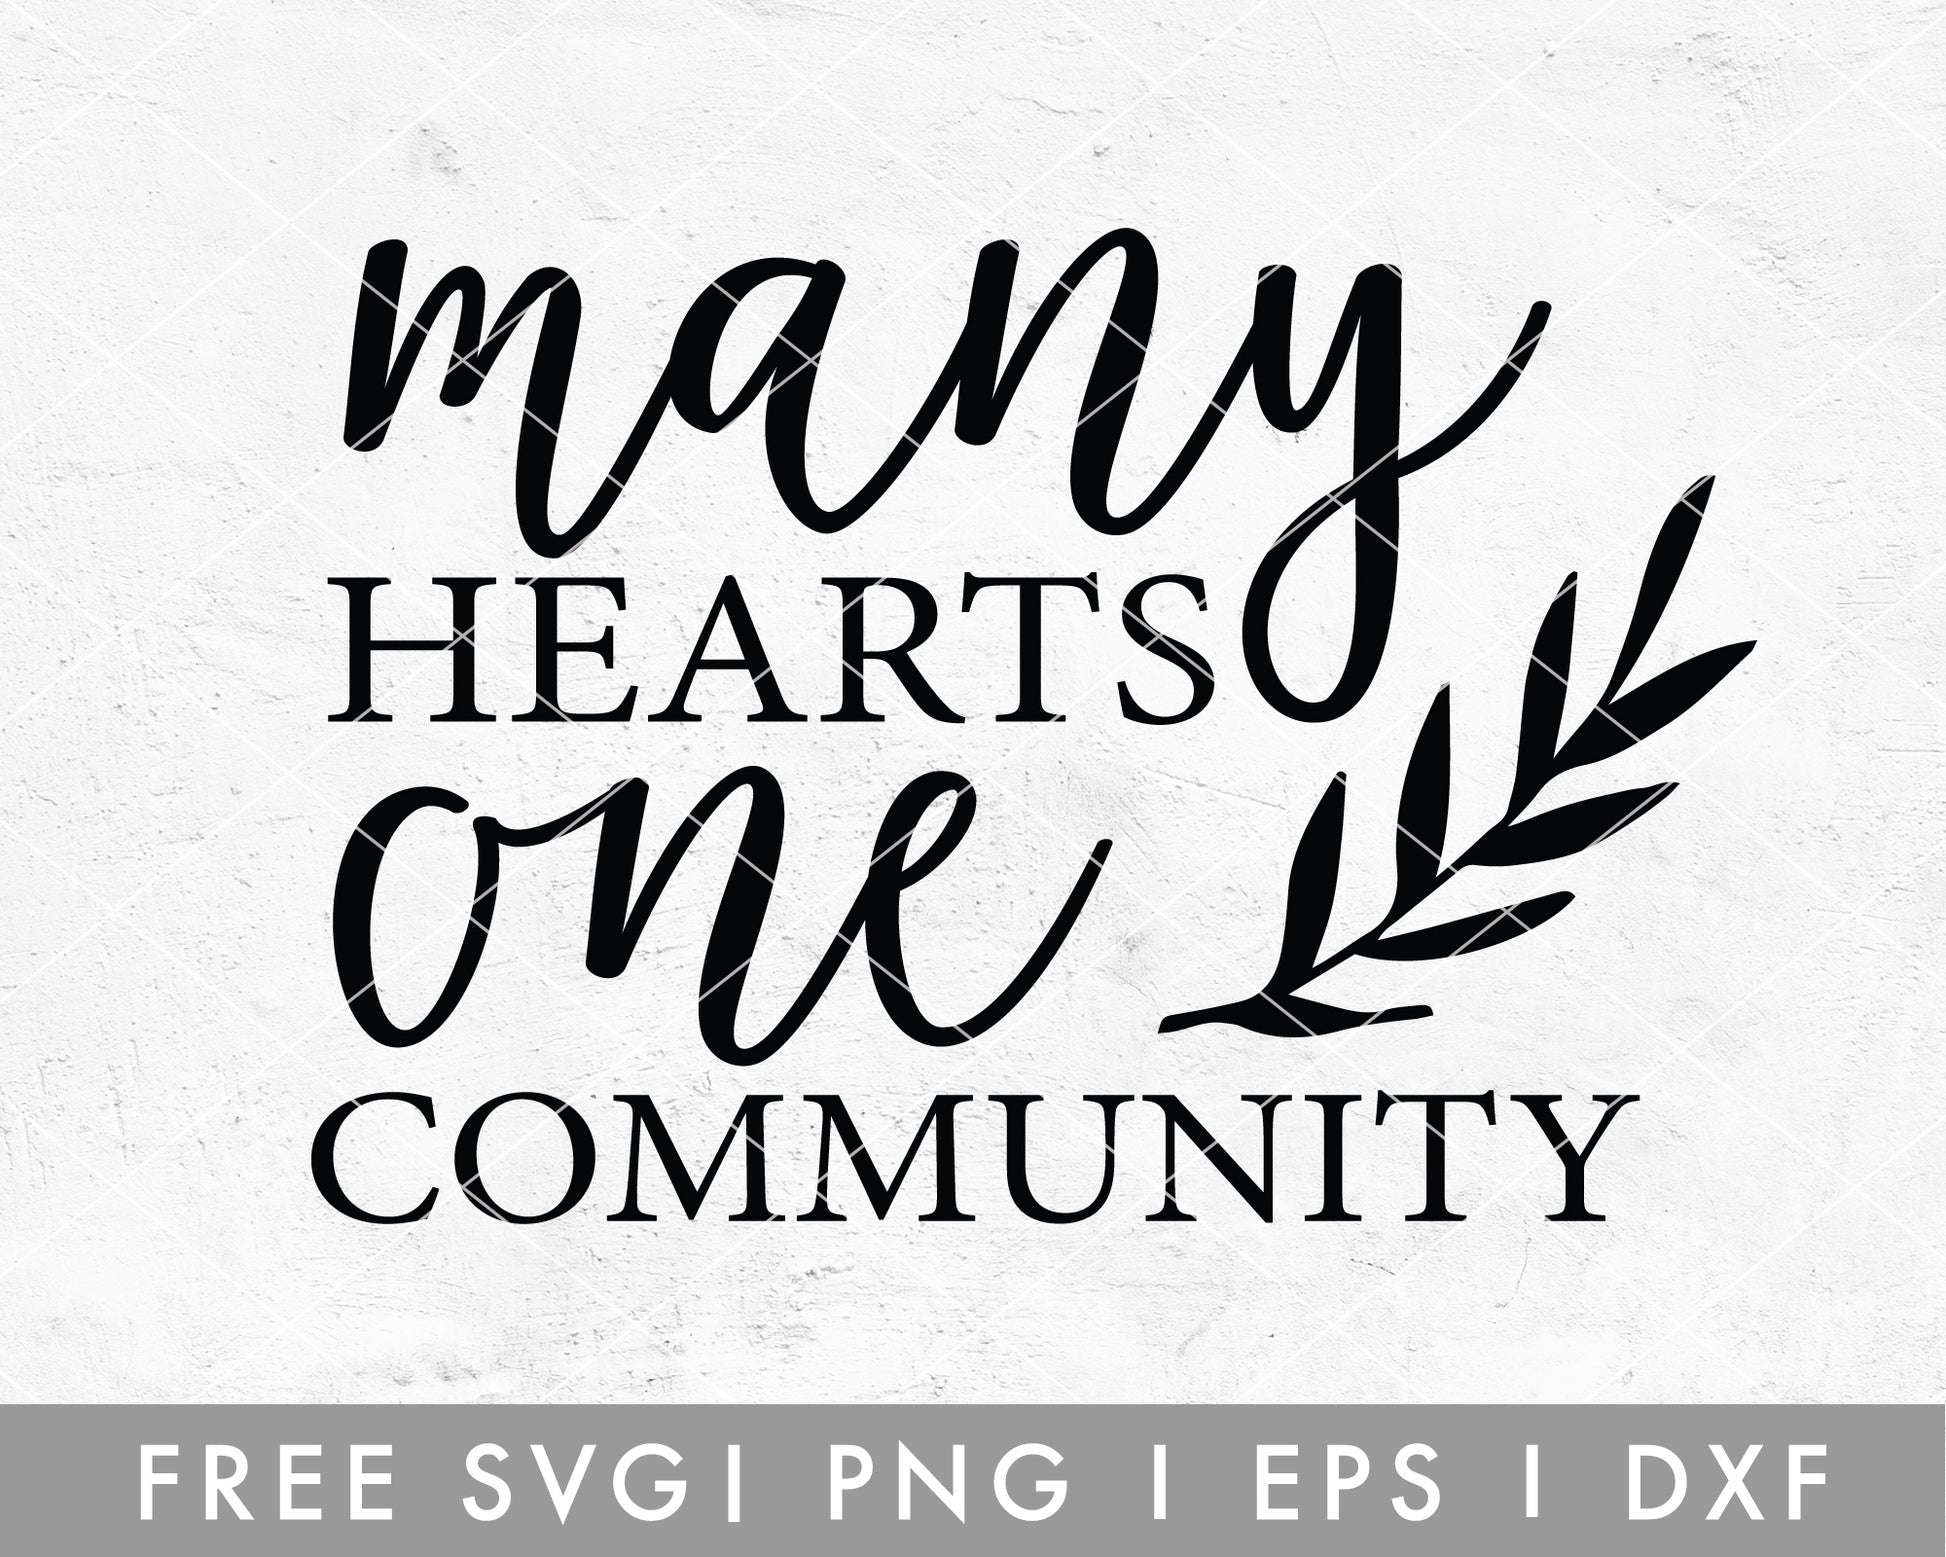 FREE Inspirational SVG | Community Quote SVG Cut File for Cricut, Cameo Silhouette | Free SVG Cut File